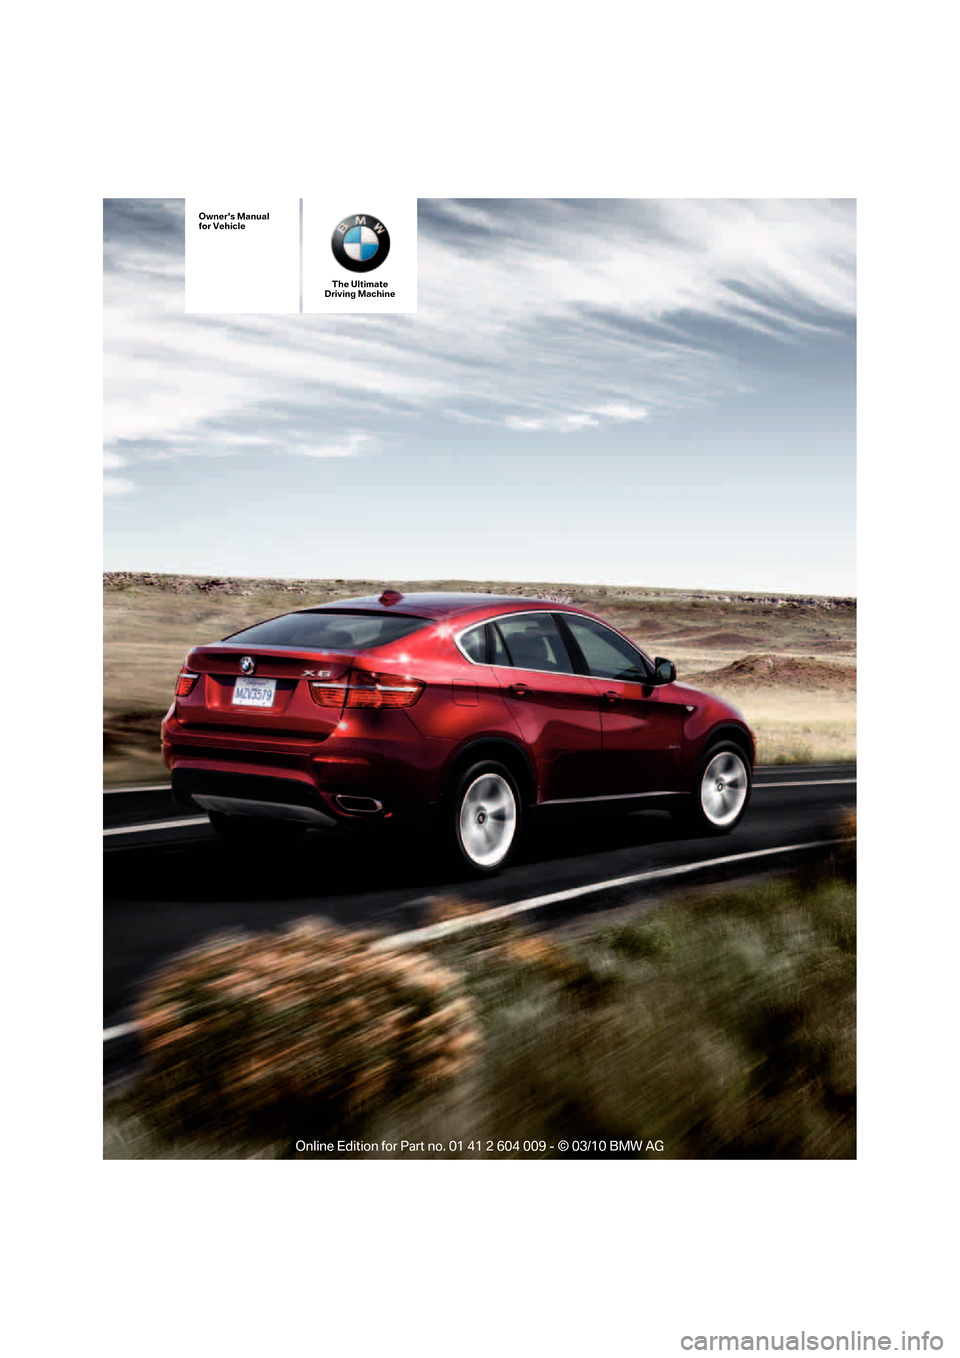 BMW X5 2011 E70 Owners Manual The Ultimate
Driving Machine
Owners Manual
for Vehicle 